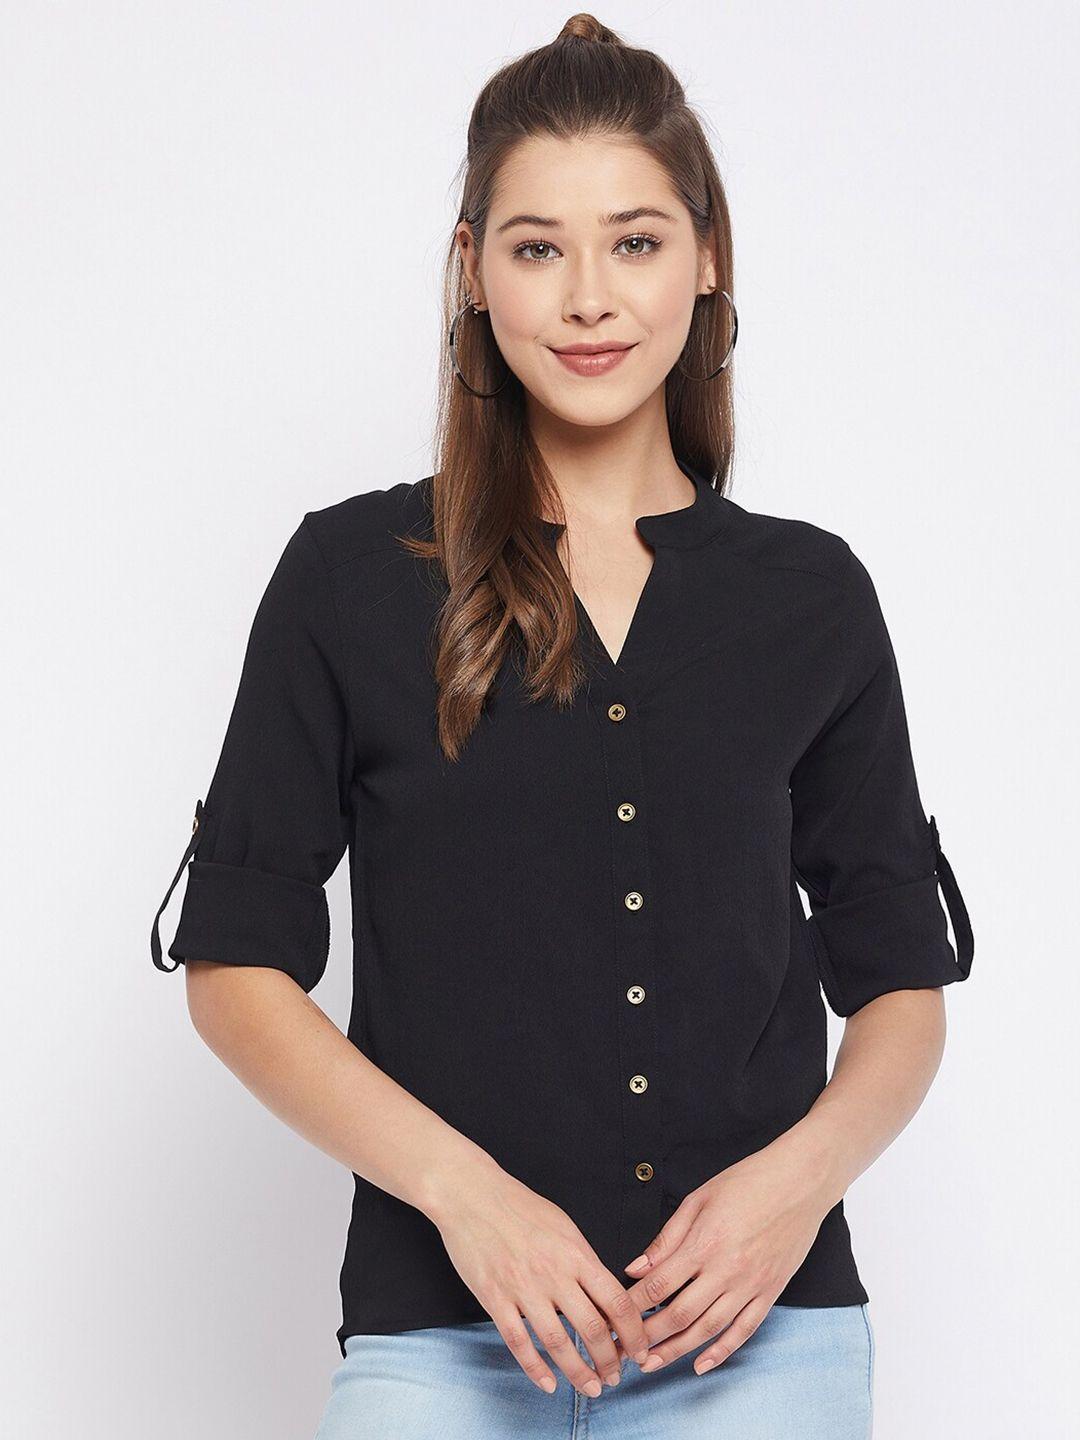 winered women black shirt style roll-up sleeves top